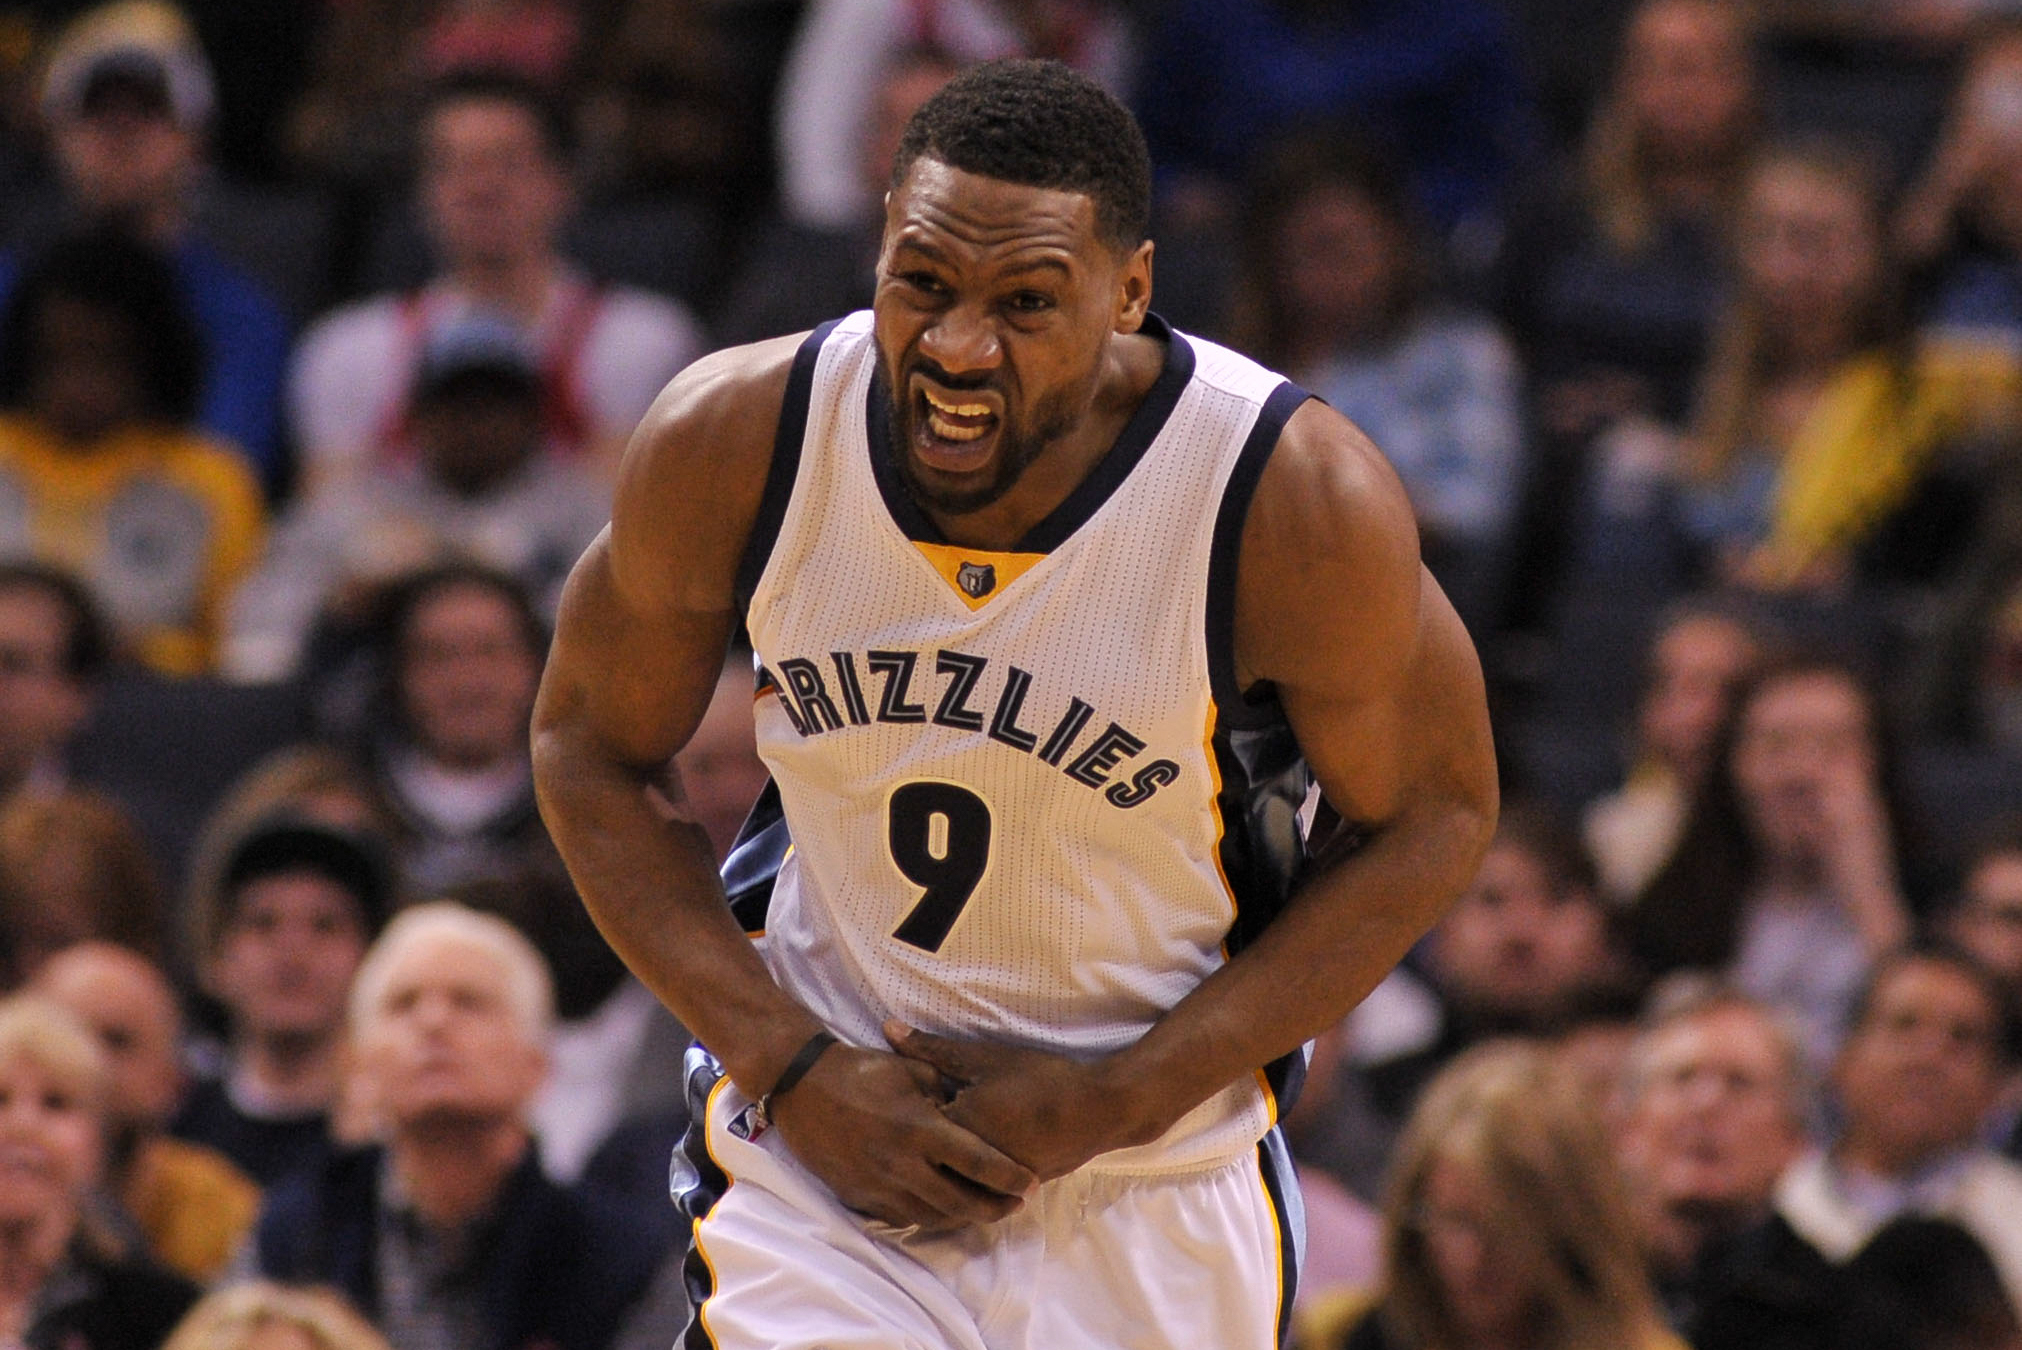 Tony Allen has become the NBA's most unlikely offensive juggernaut